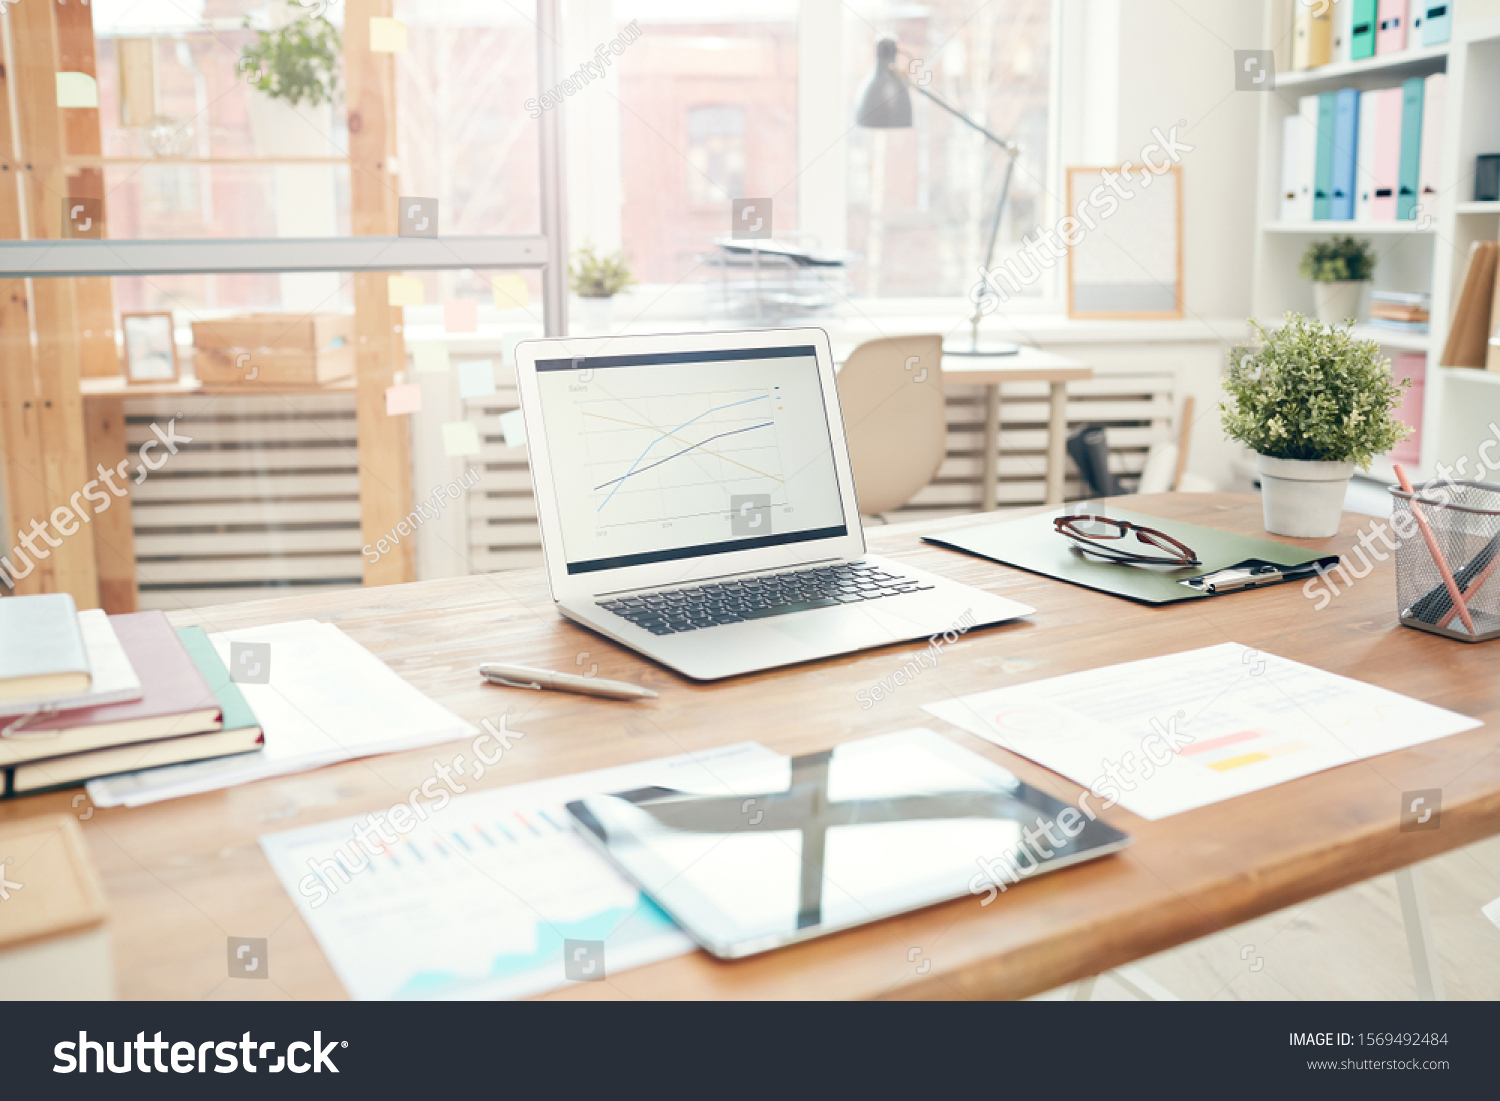 Background image of modern office interior with laptop on wooden table, workplace design concept, copy space #1569492484